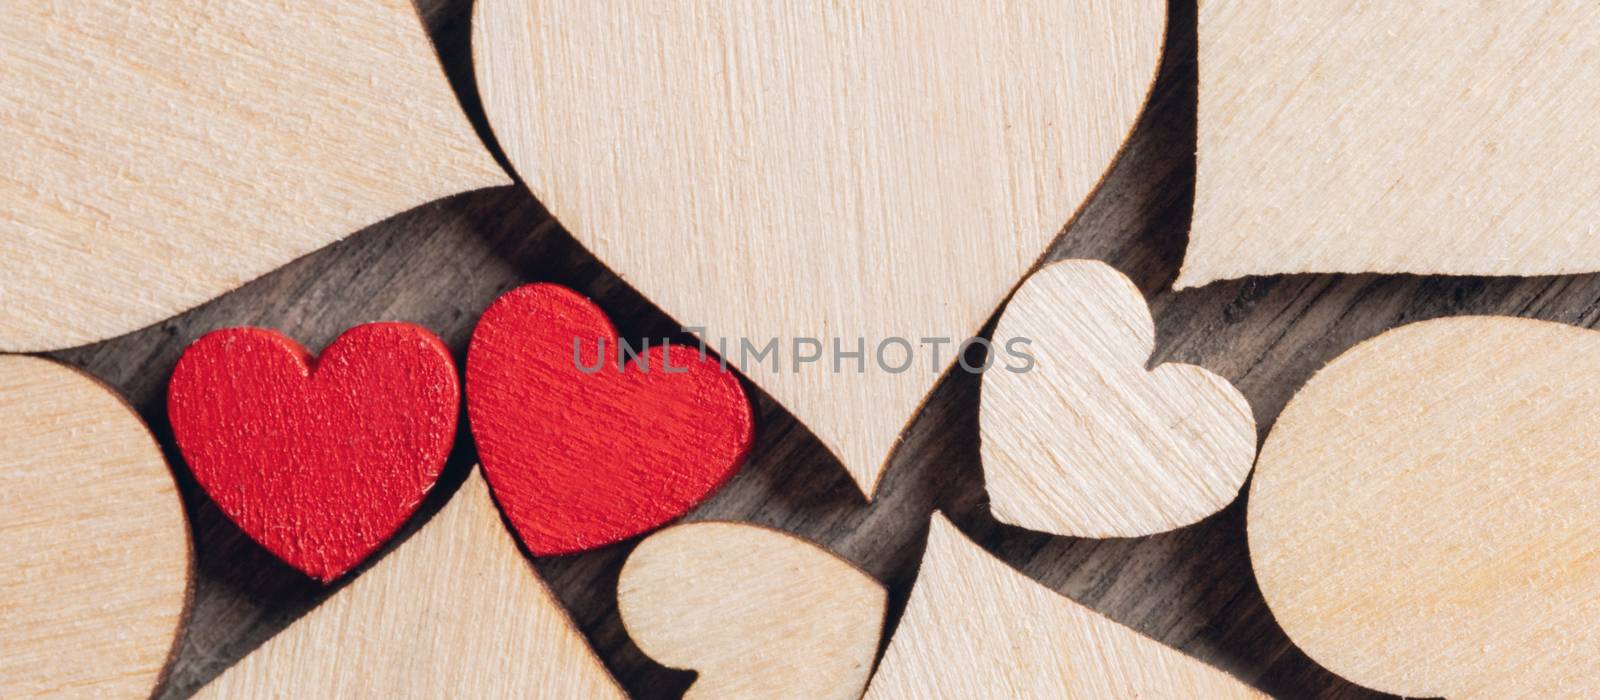 Two wooden painted red hearts among many colorless wooden hearts